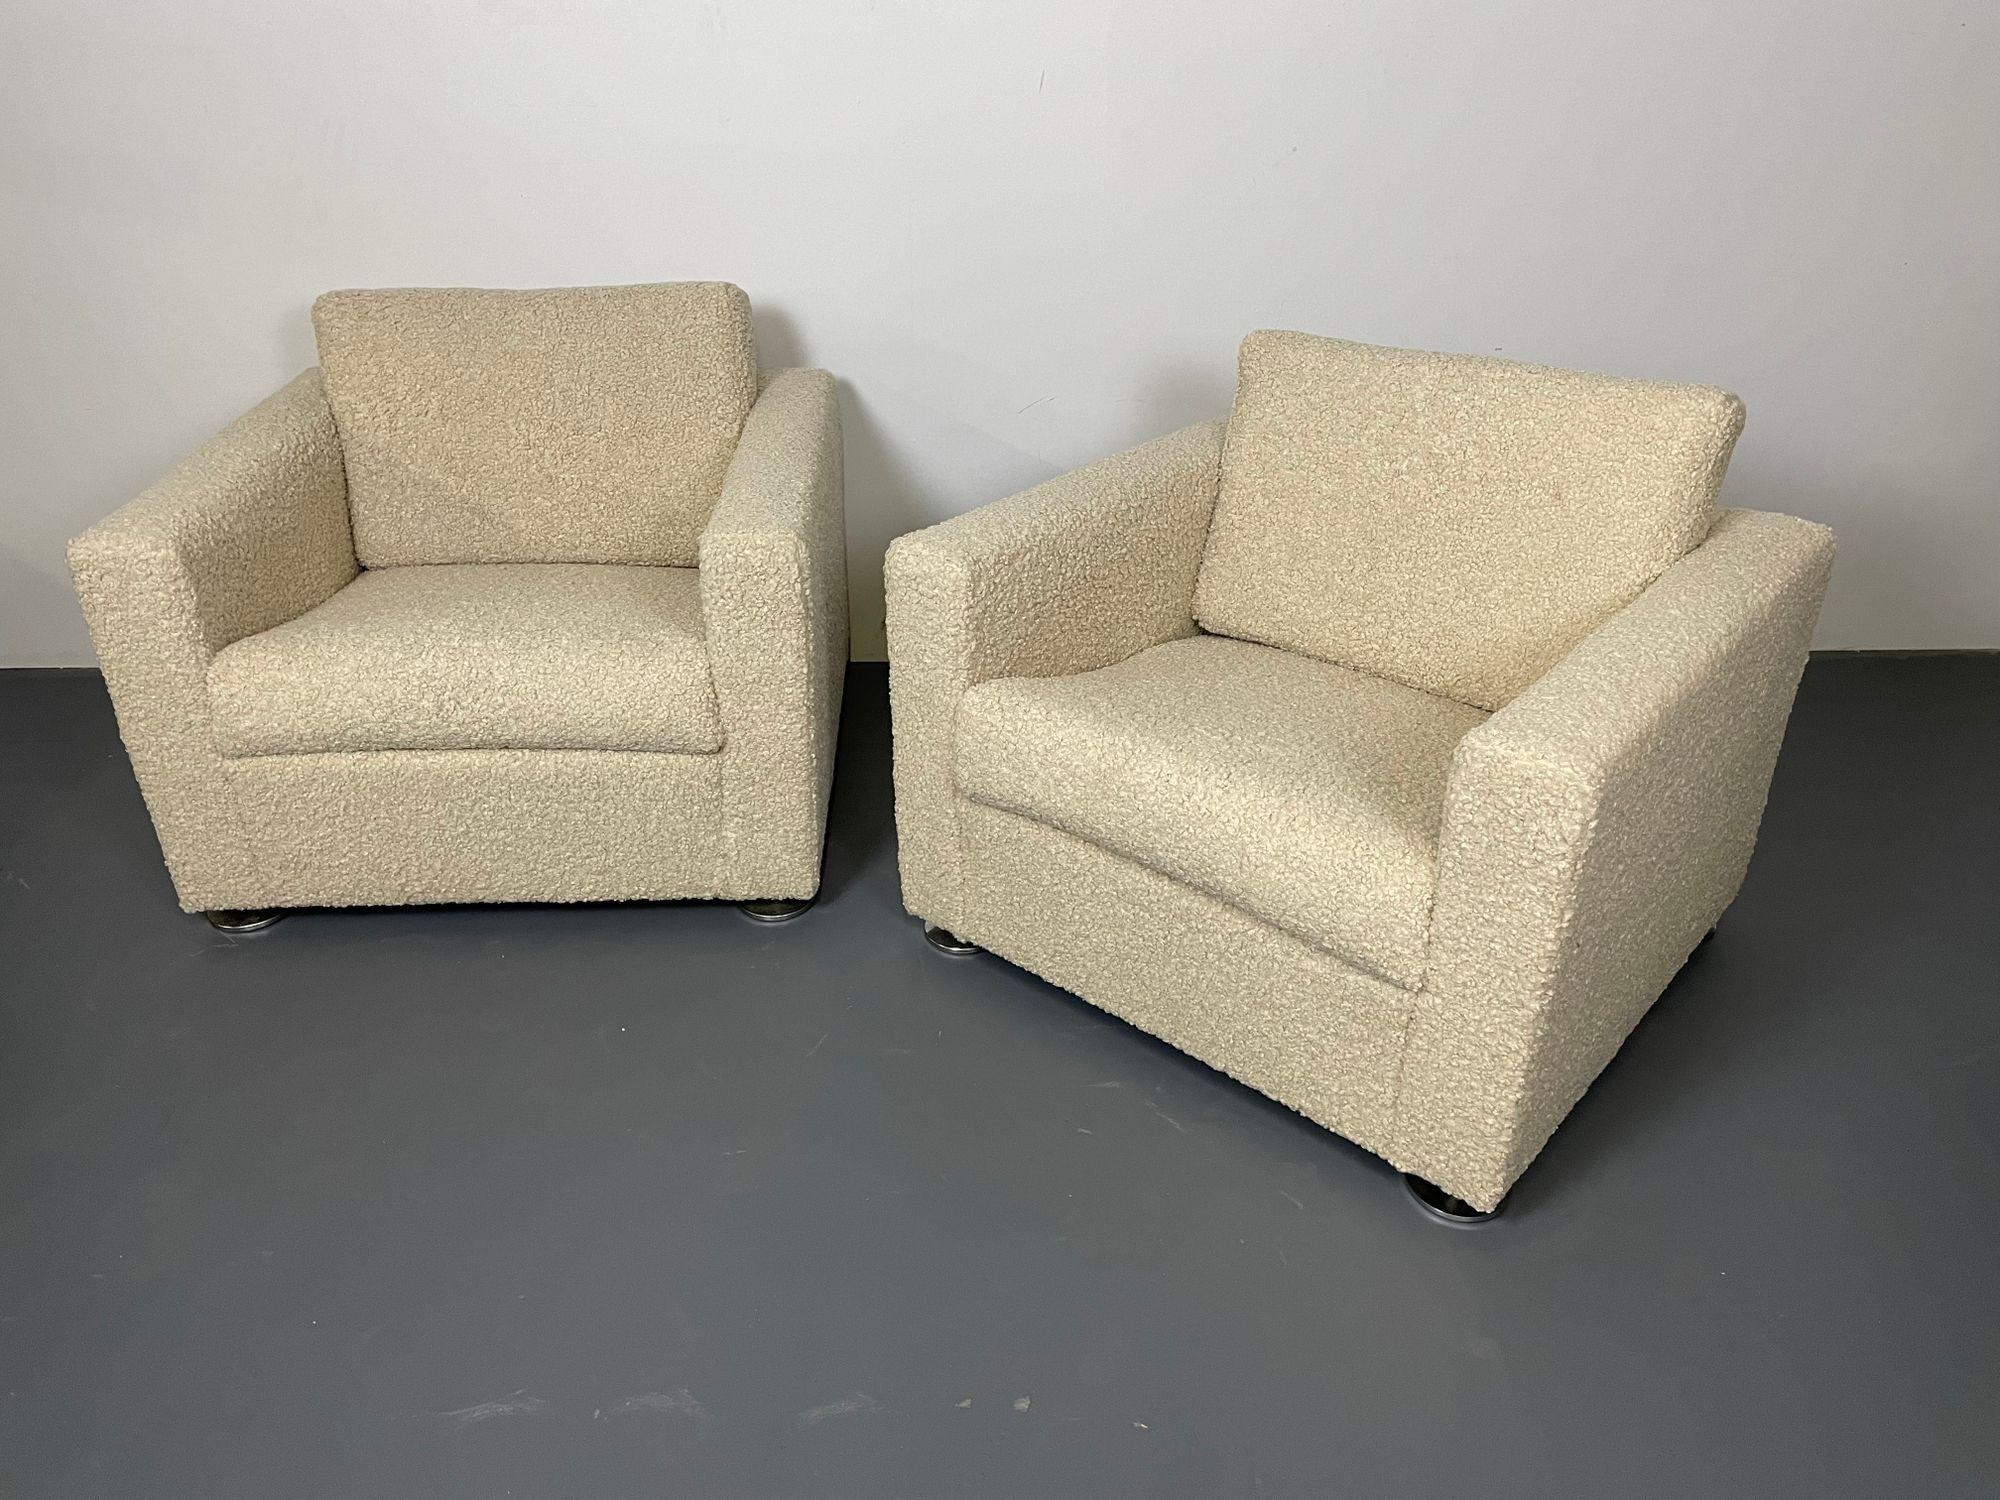 Pair Stendig arm chairs, Switzerland, New Sheepskin Boucle, Mid-Century Modern
 
A rare pair of Stendig made in Switzerland arm chairs in a new sheepskin style boucle, thick and rich with fully redone cushions. The box form mid century modern